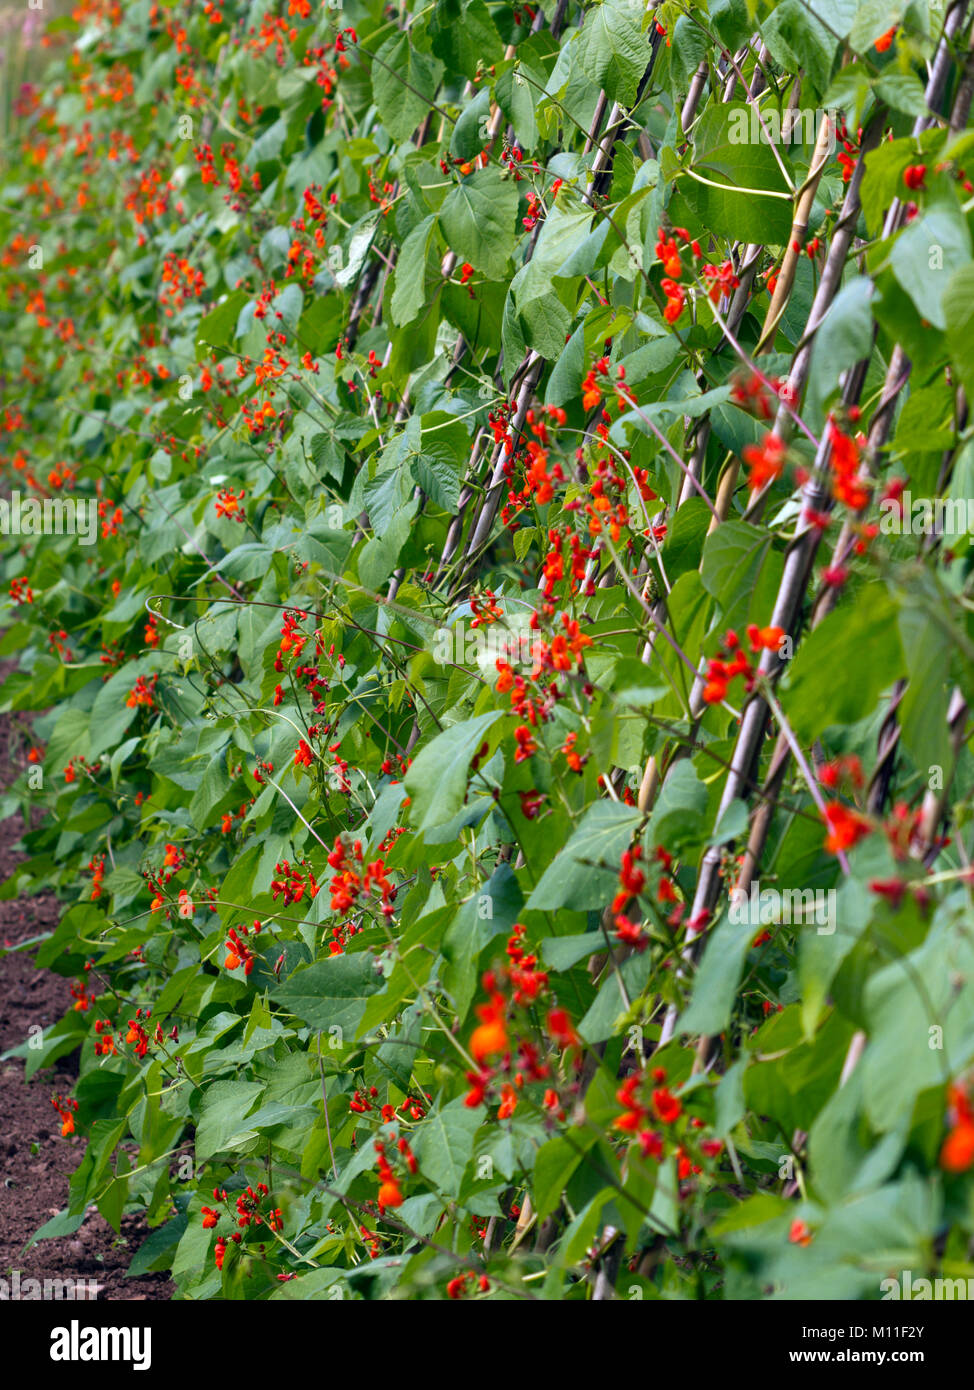 Abundant red blossom on a row of runner bean plants. Shallow depth of field. Stock Photo